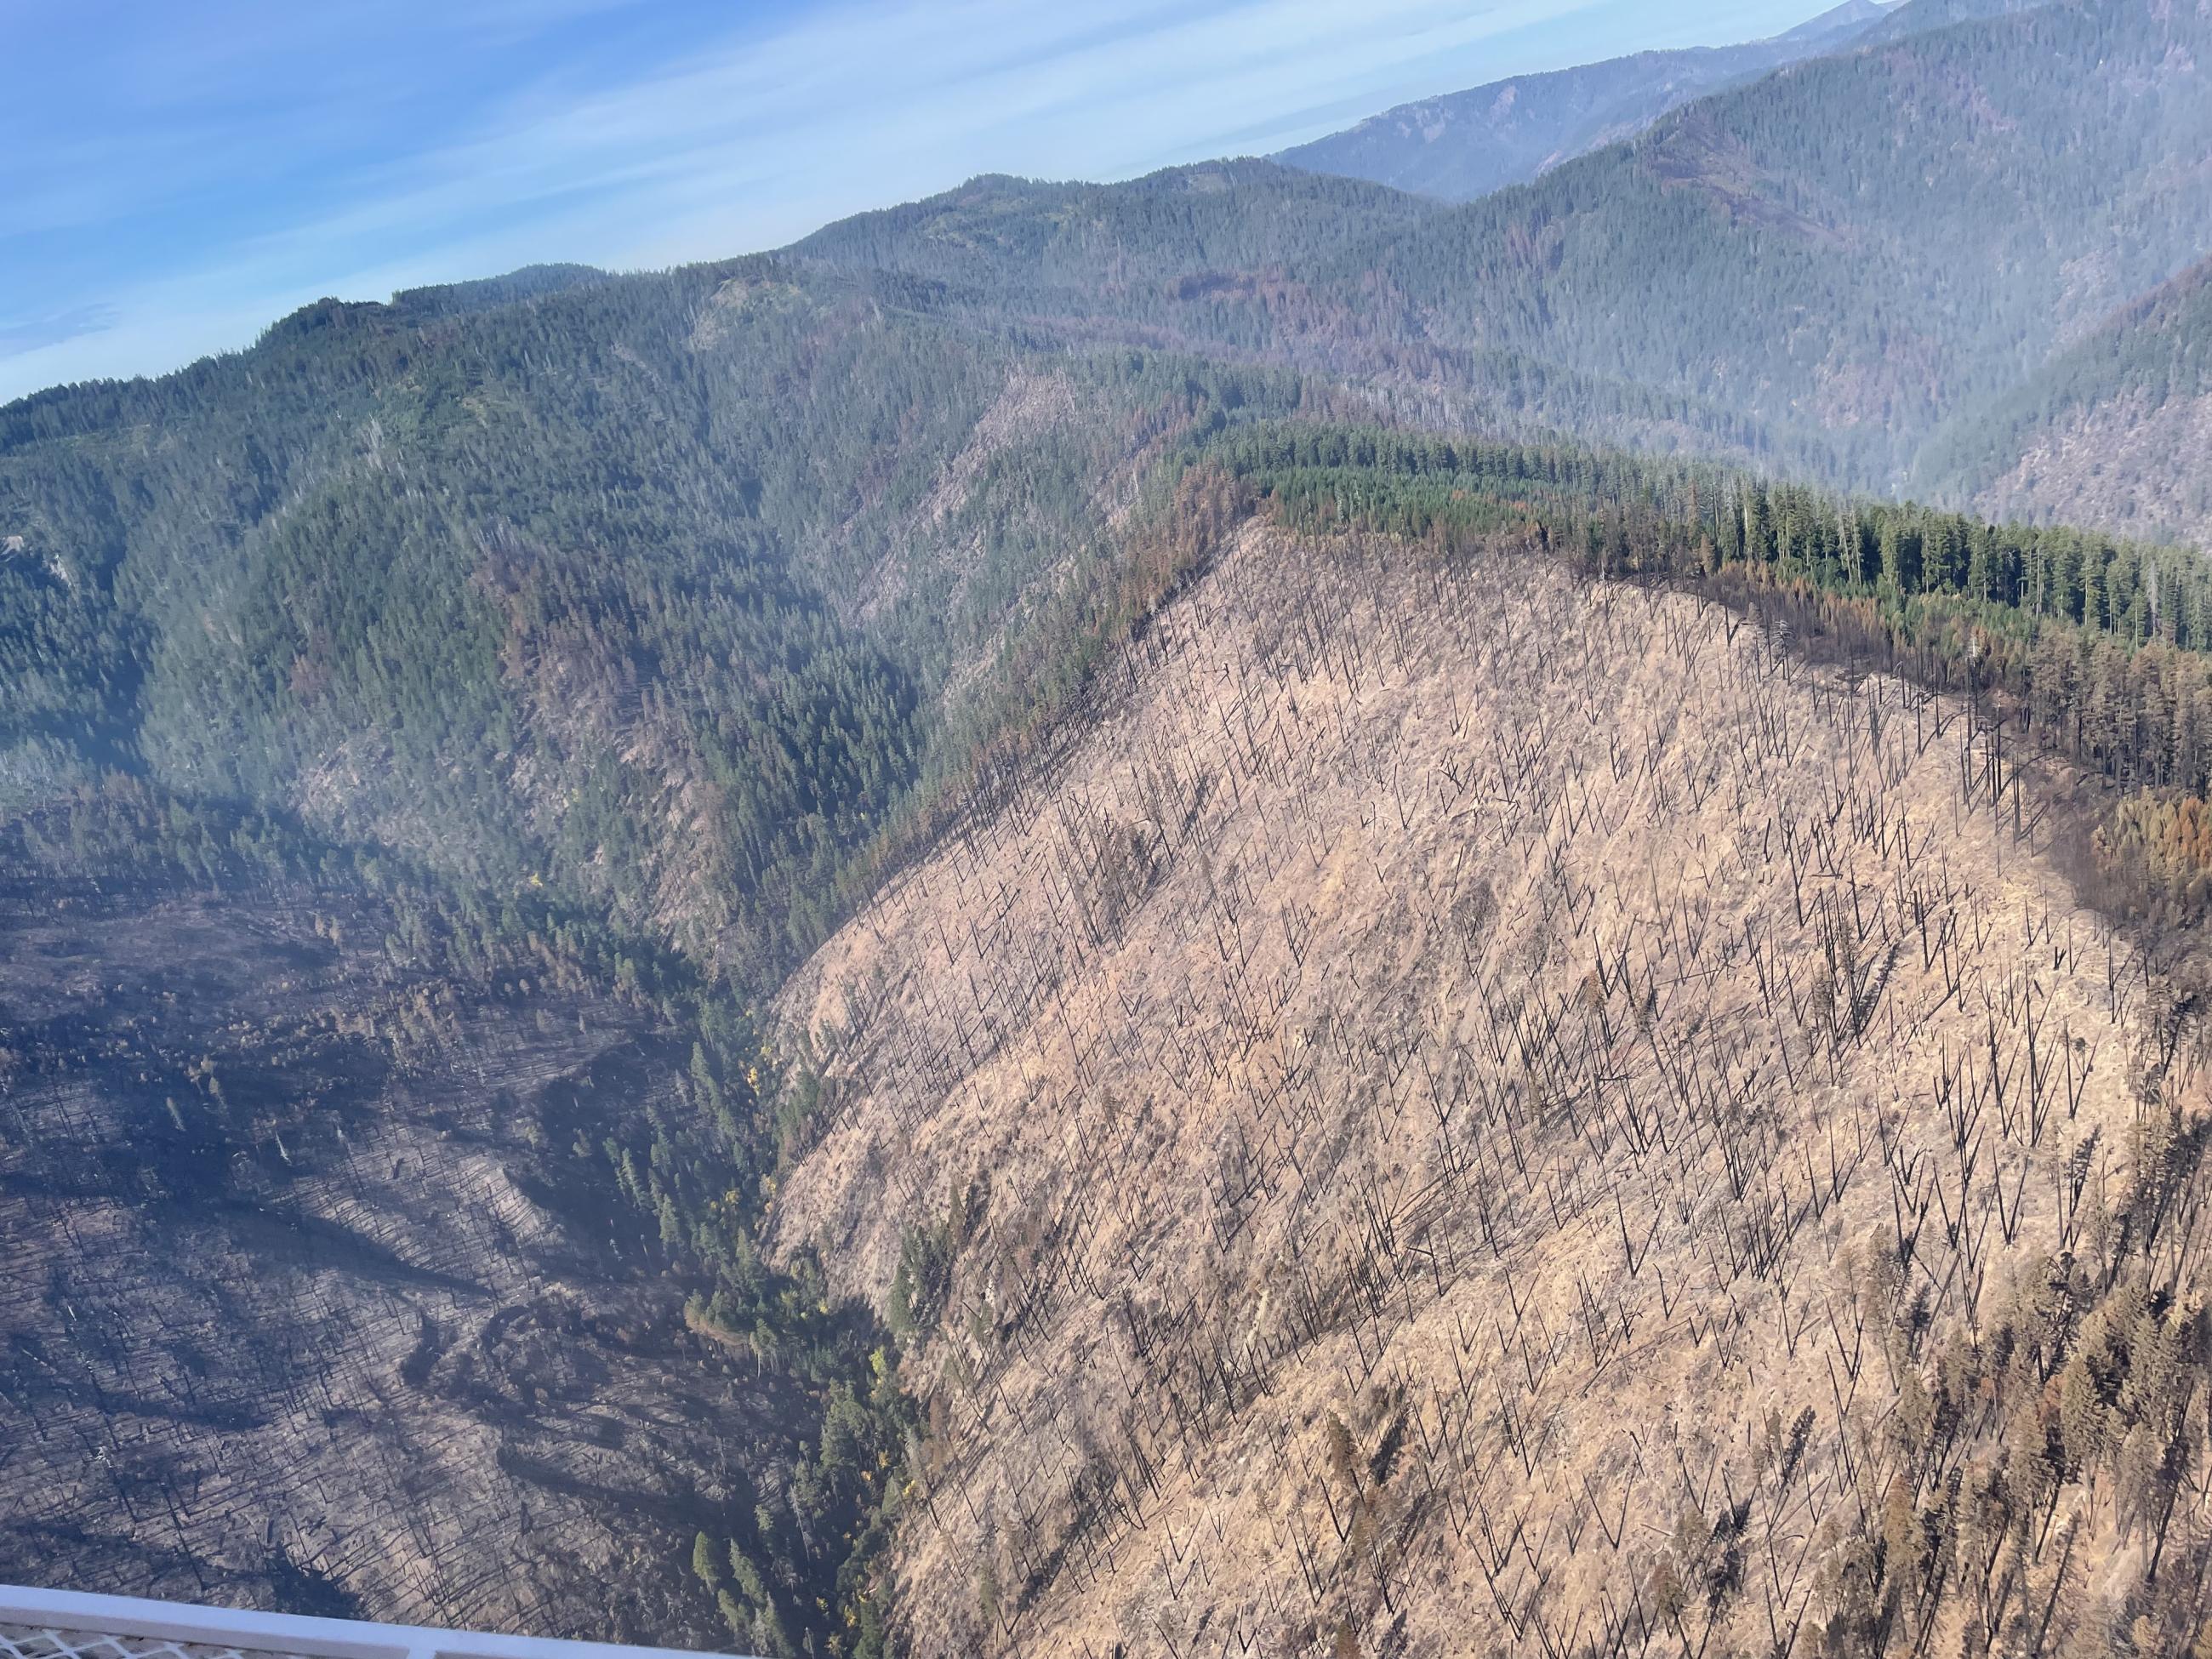 Mosquito Fire-Lightening Ridge on left with multiple failures, the ridge north of Salal gulch has high soil burn severity